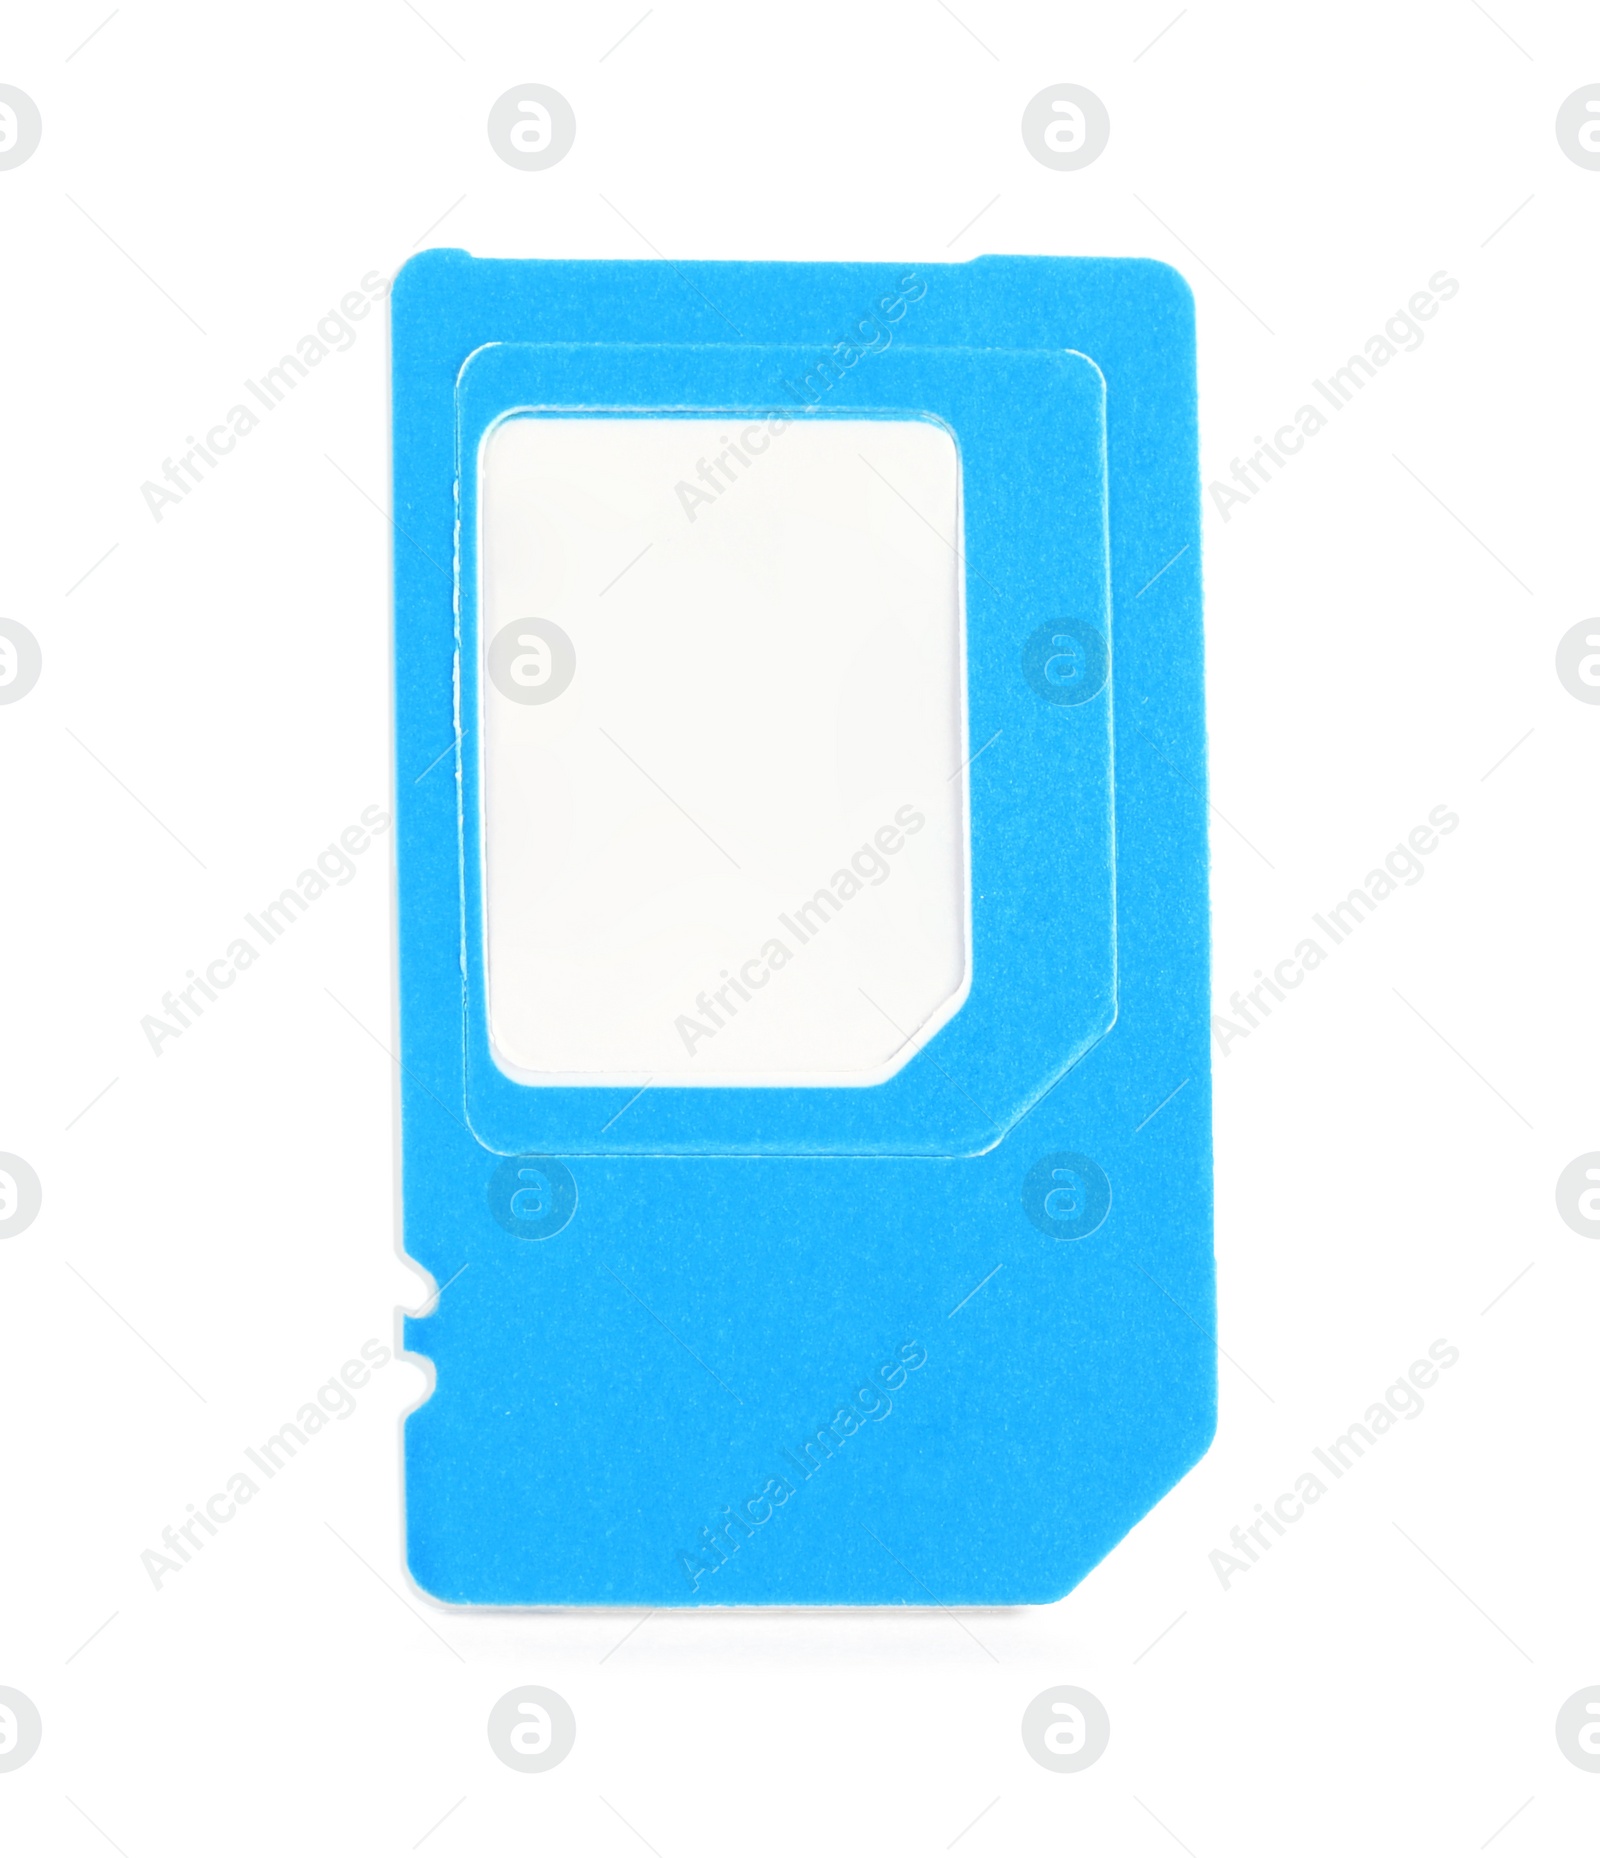 Photo of Modern light blue SIM card isolated on white